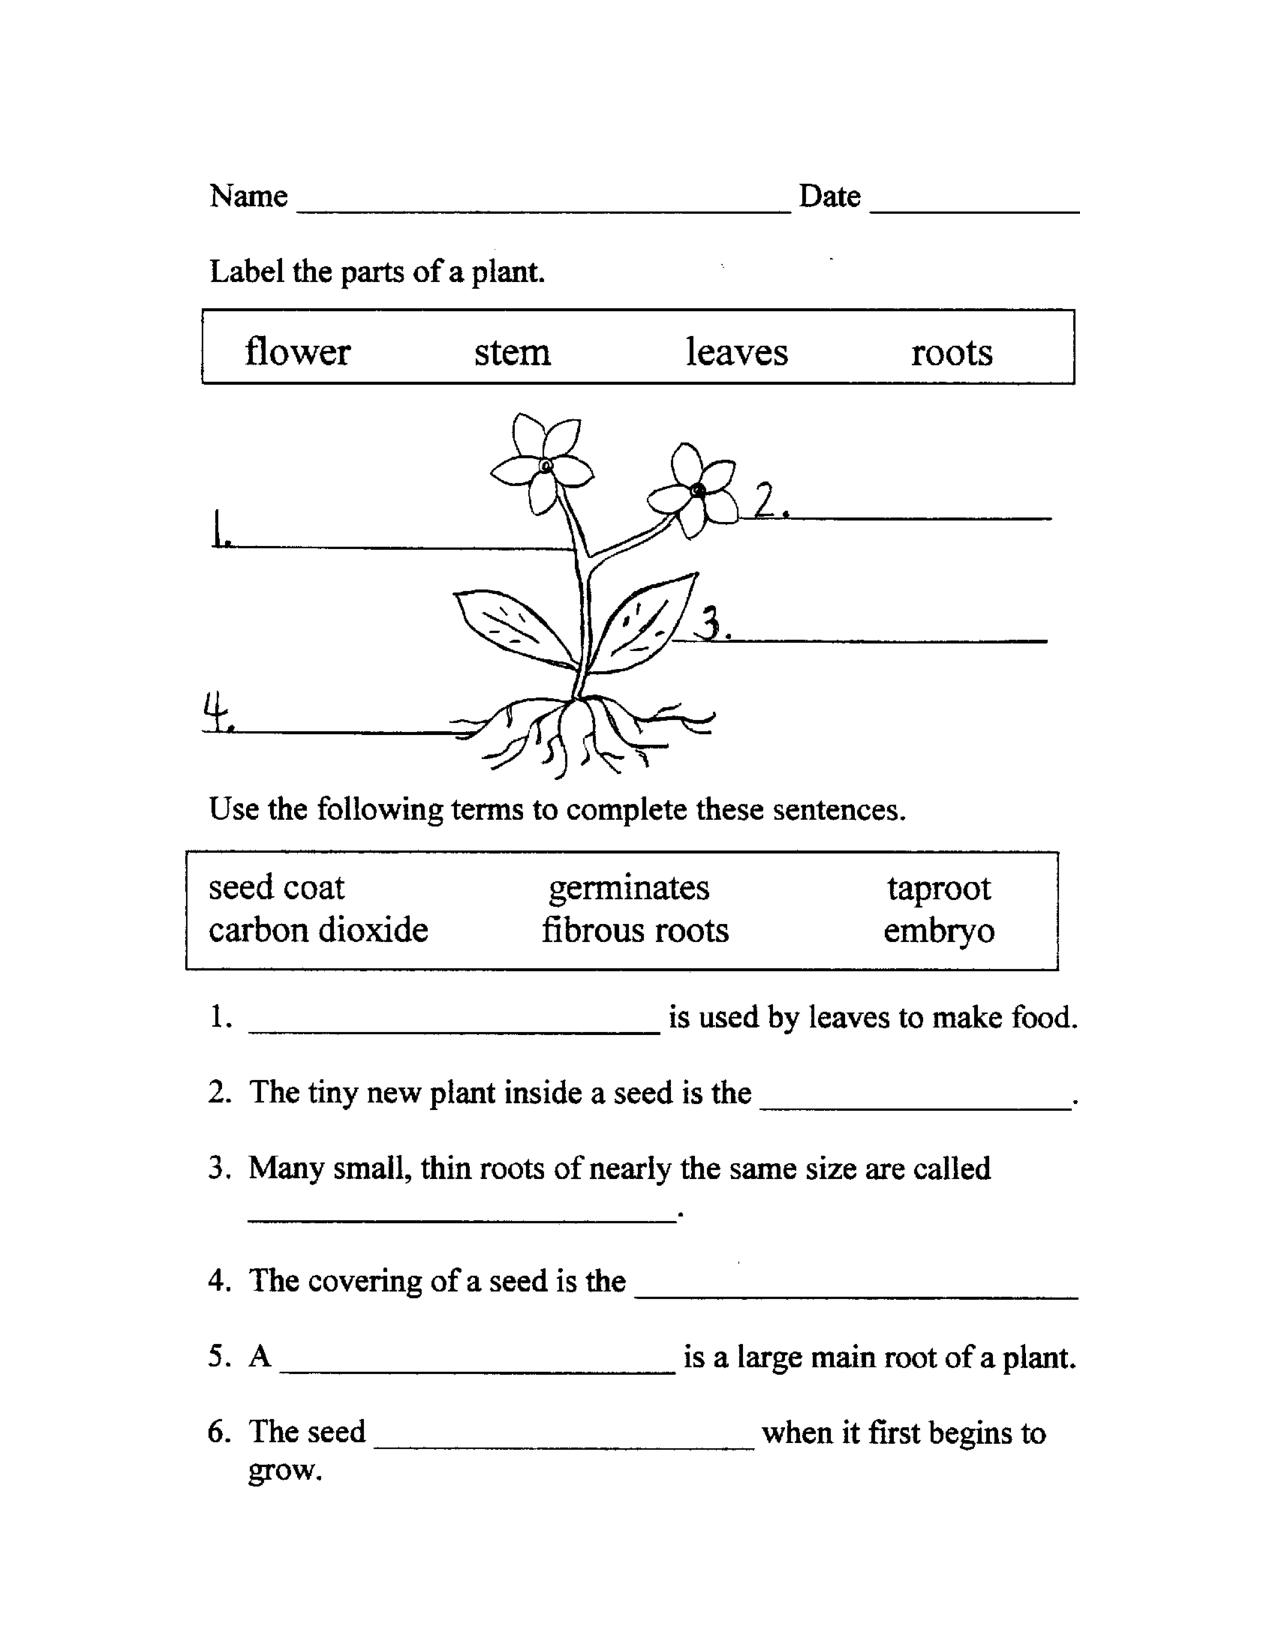 13-best-images-of-plant-parts-and-functions-worksheet-label-plant-parts-worksheet-flower